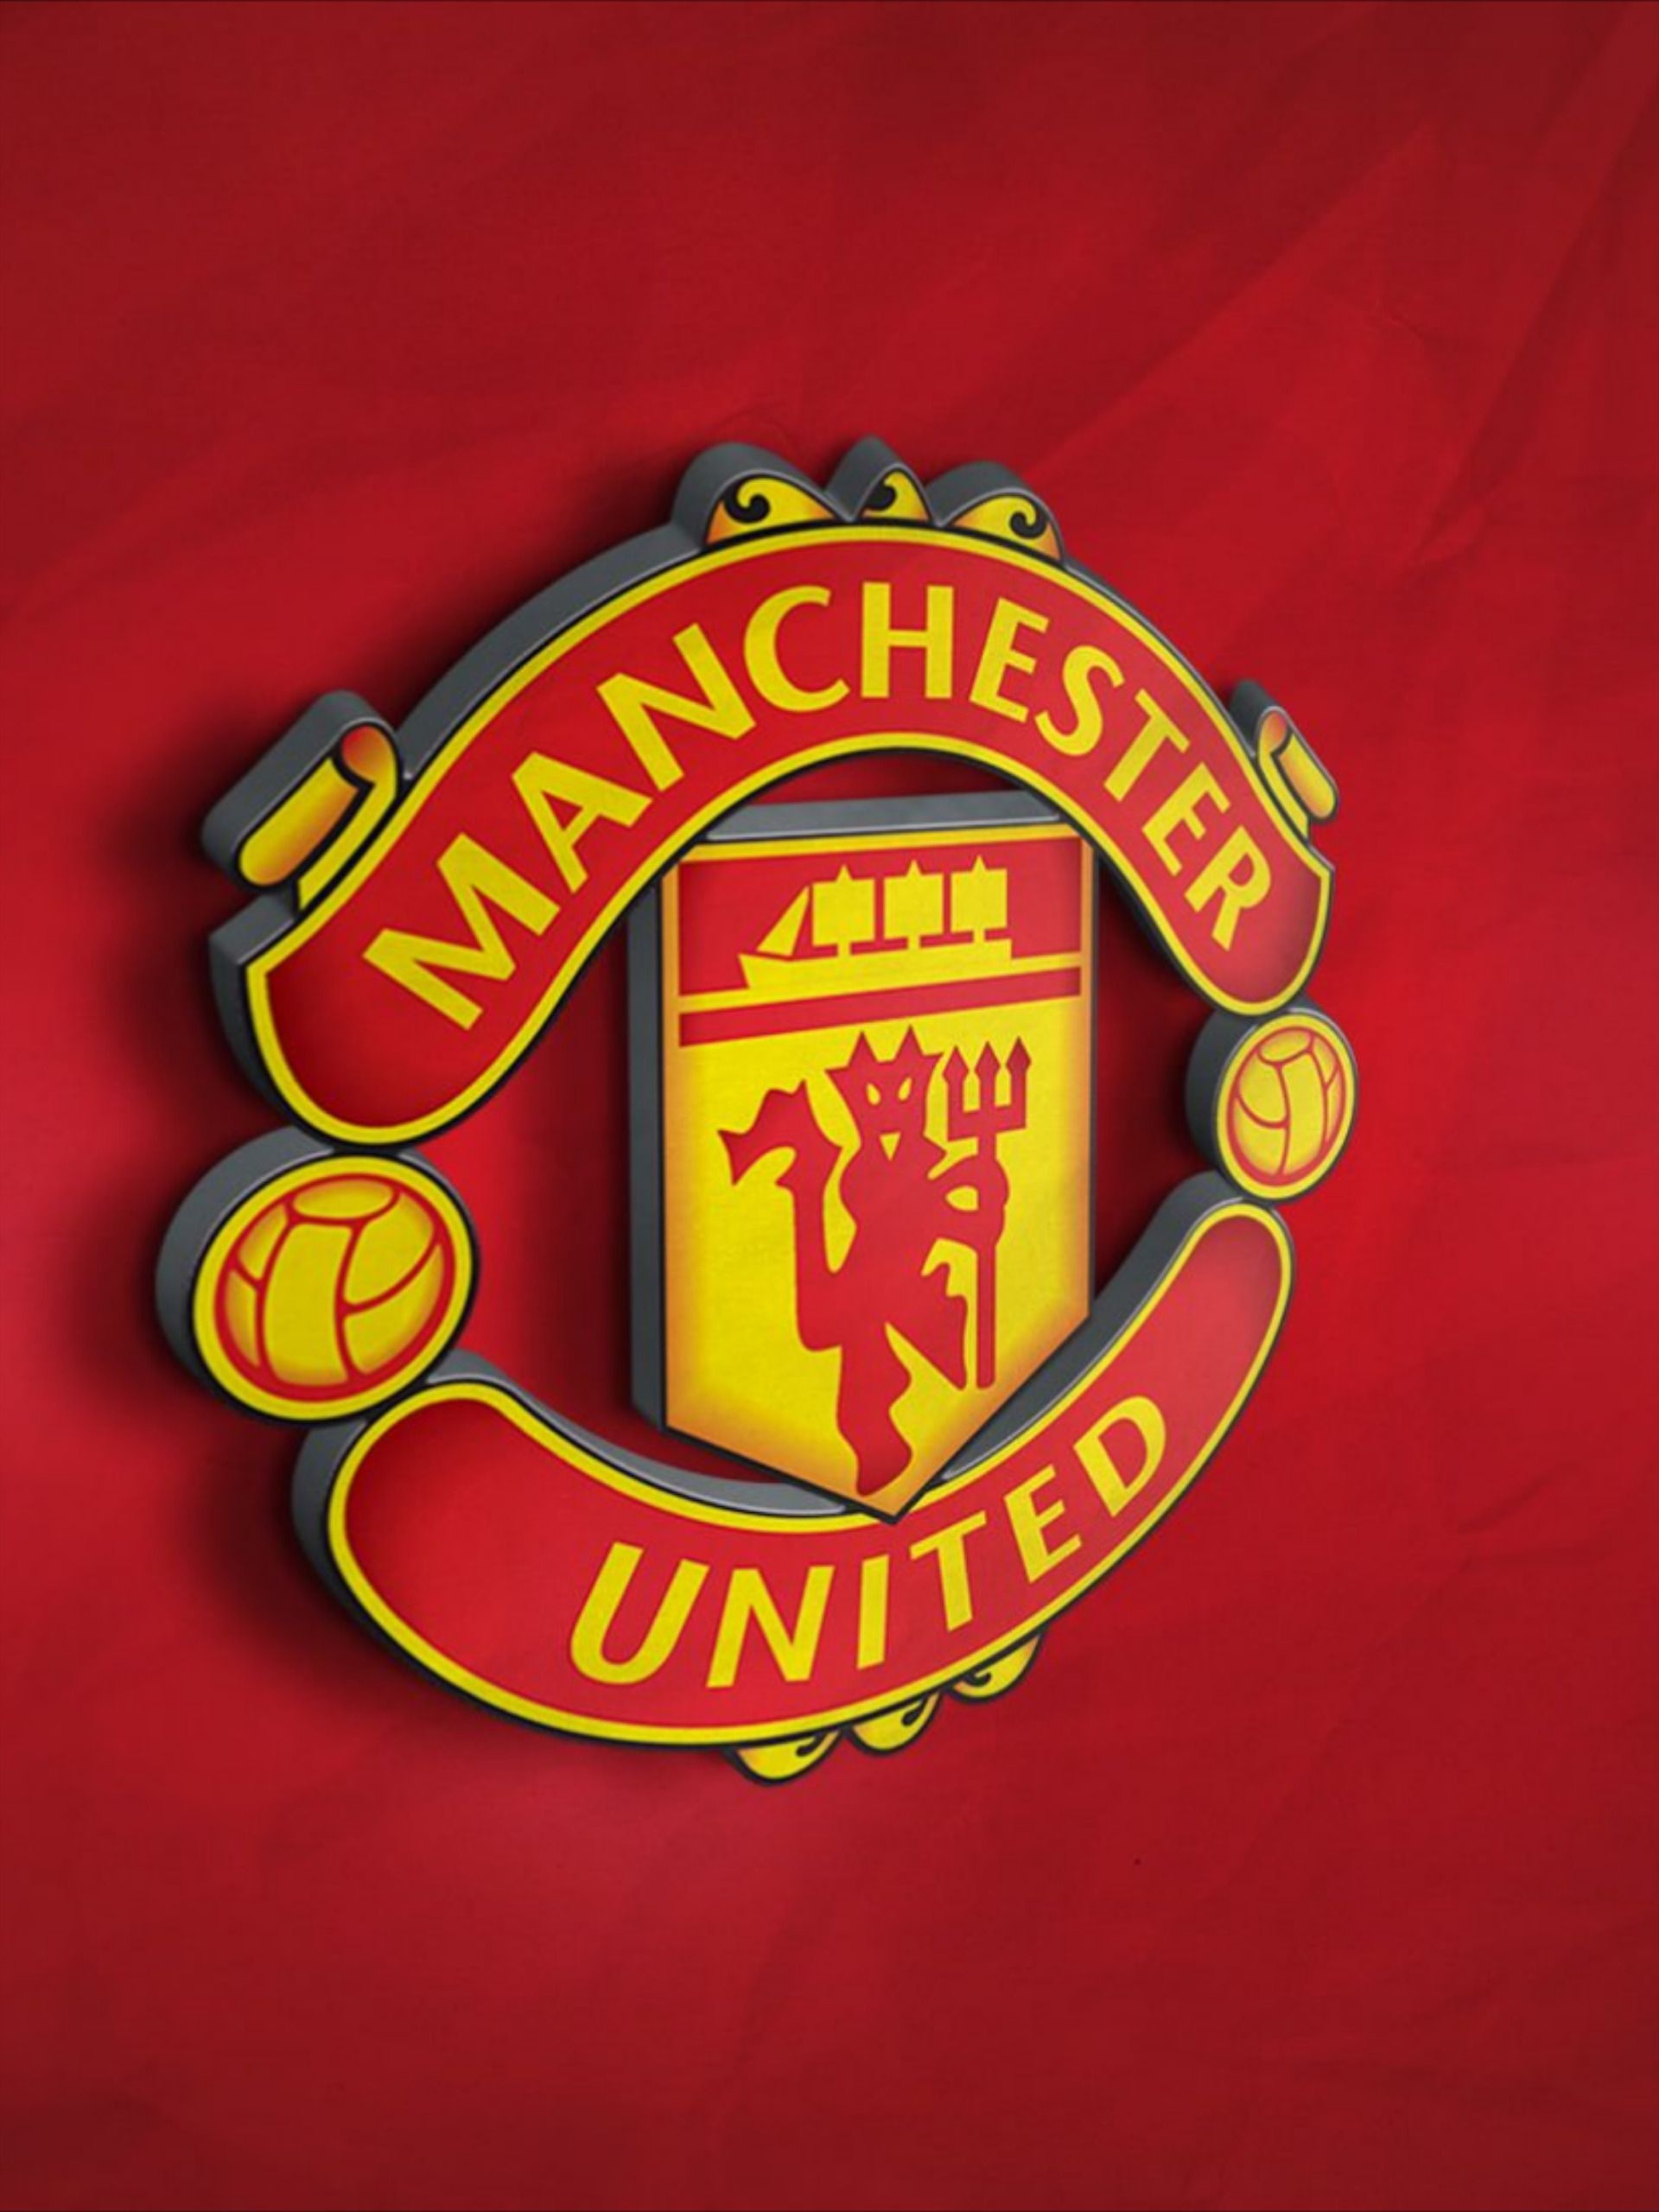 Manchester United: The first English club to win Premier League, FA Cup, and UEFA Champions League in one season. 1920x2560 HD Wallpaper.